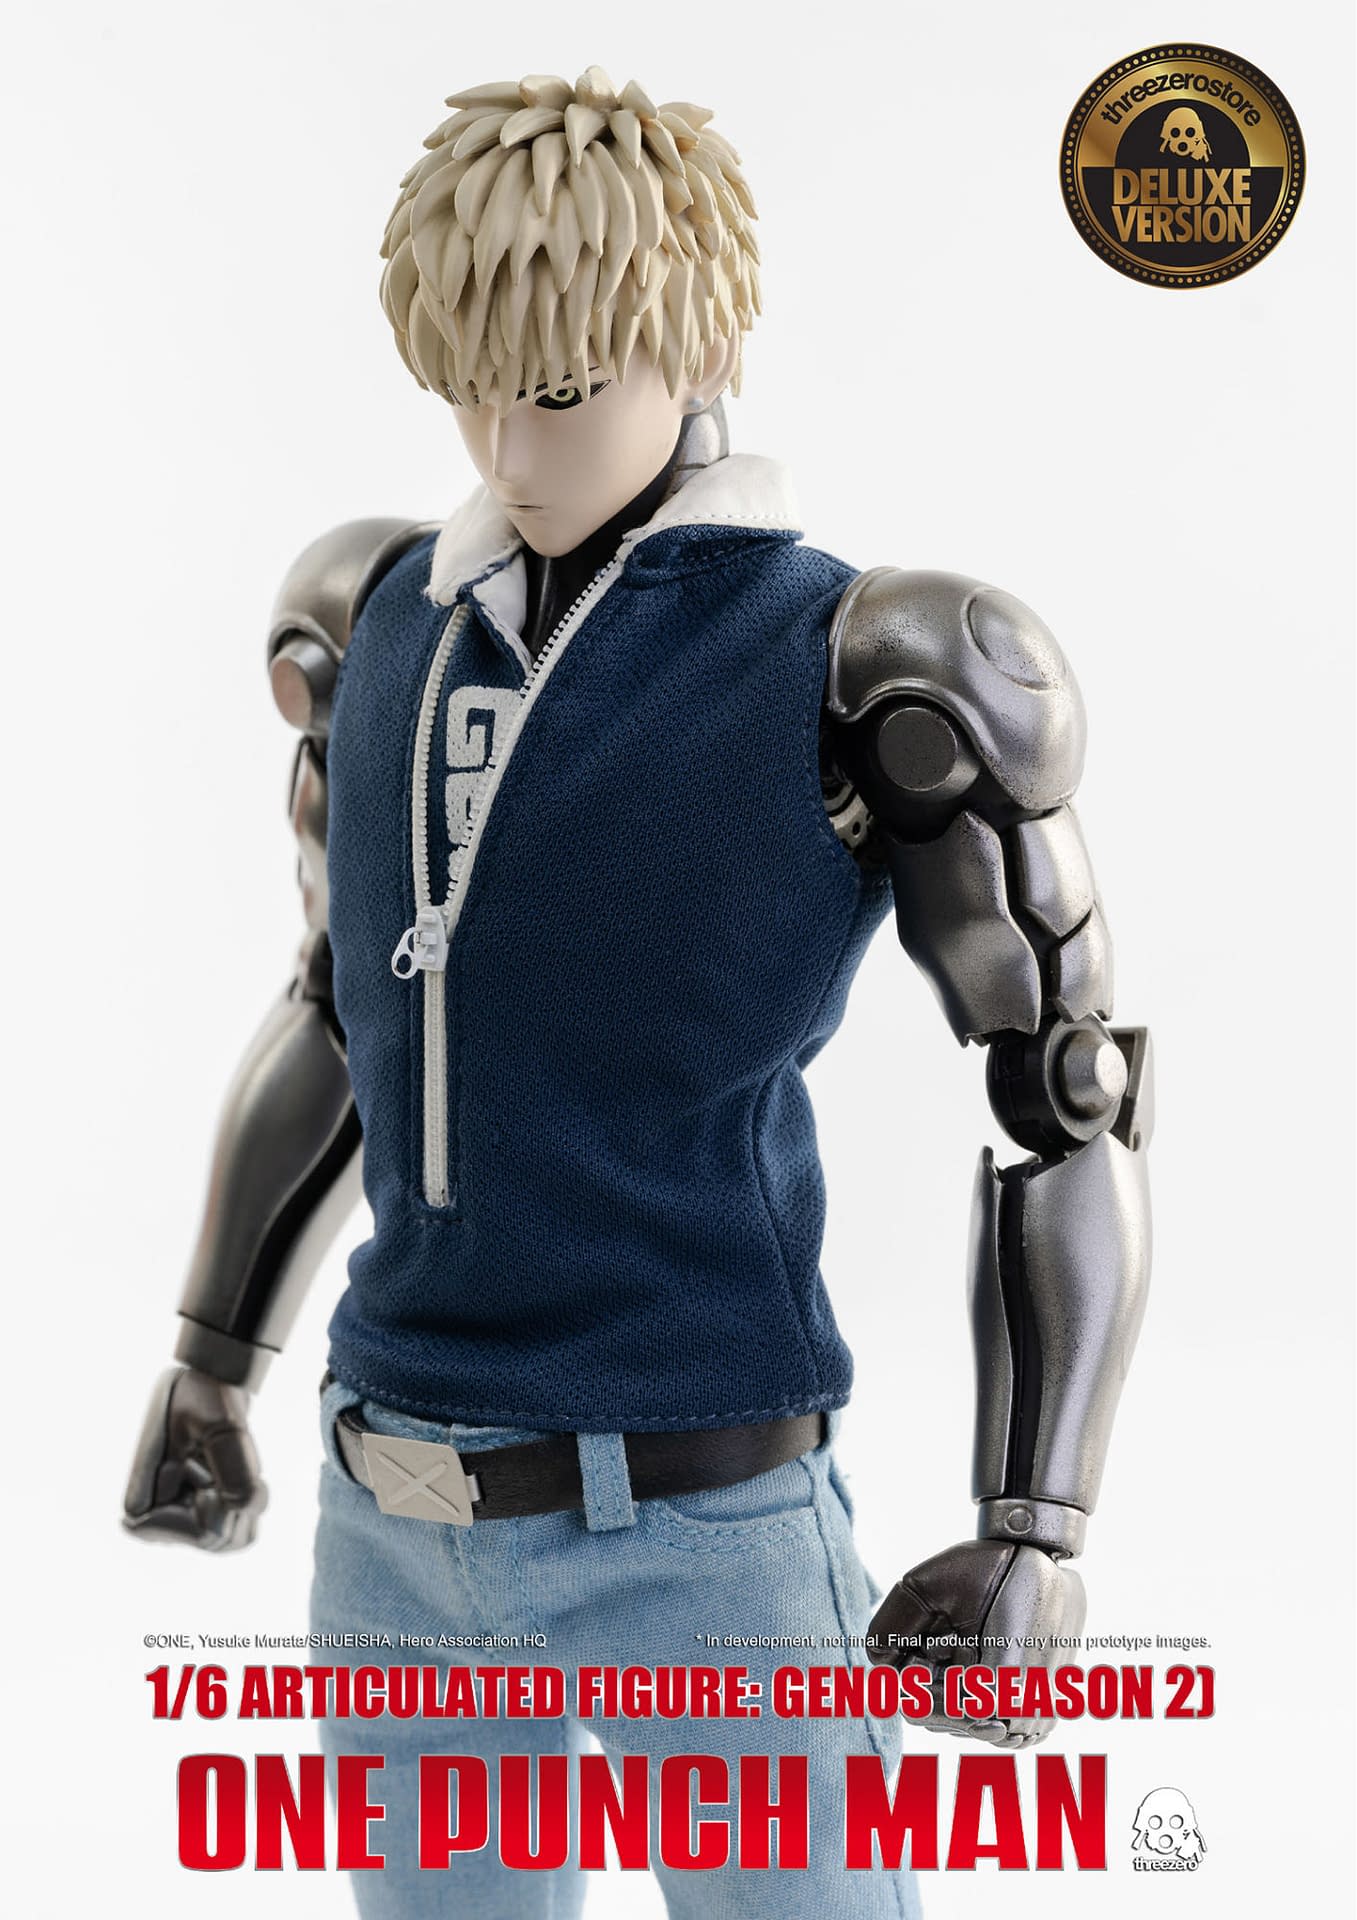 "One Punch Man" Genos Brings His A Game with Threezero